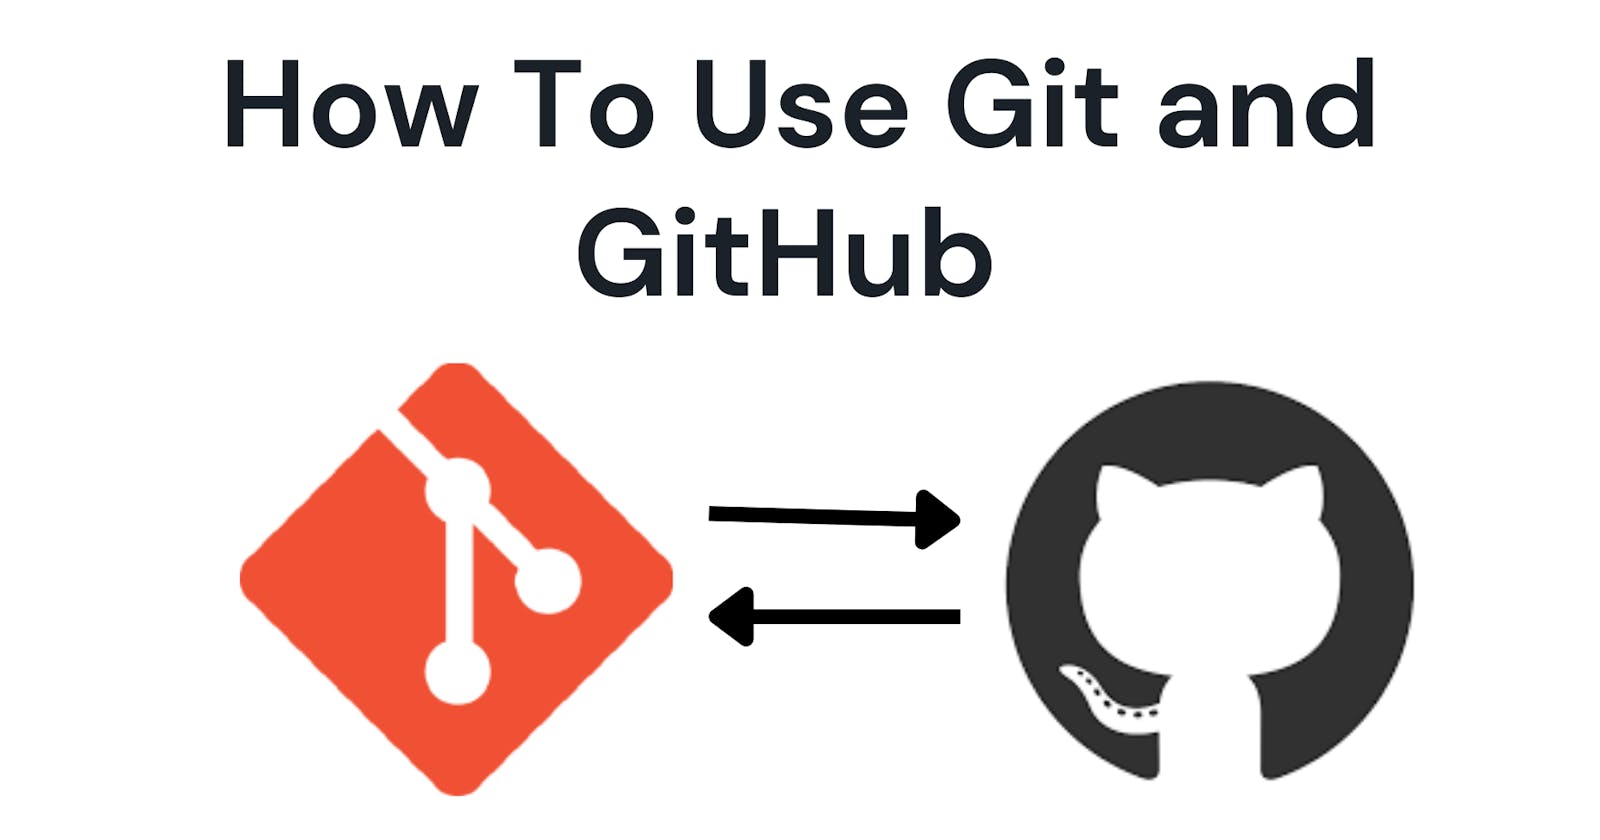 How To Use Git and Github From The Command Line